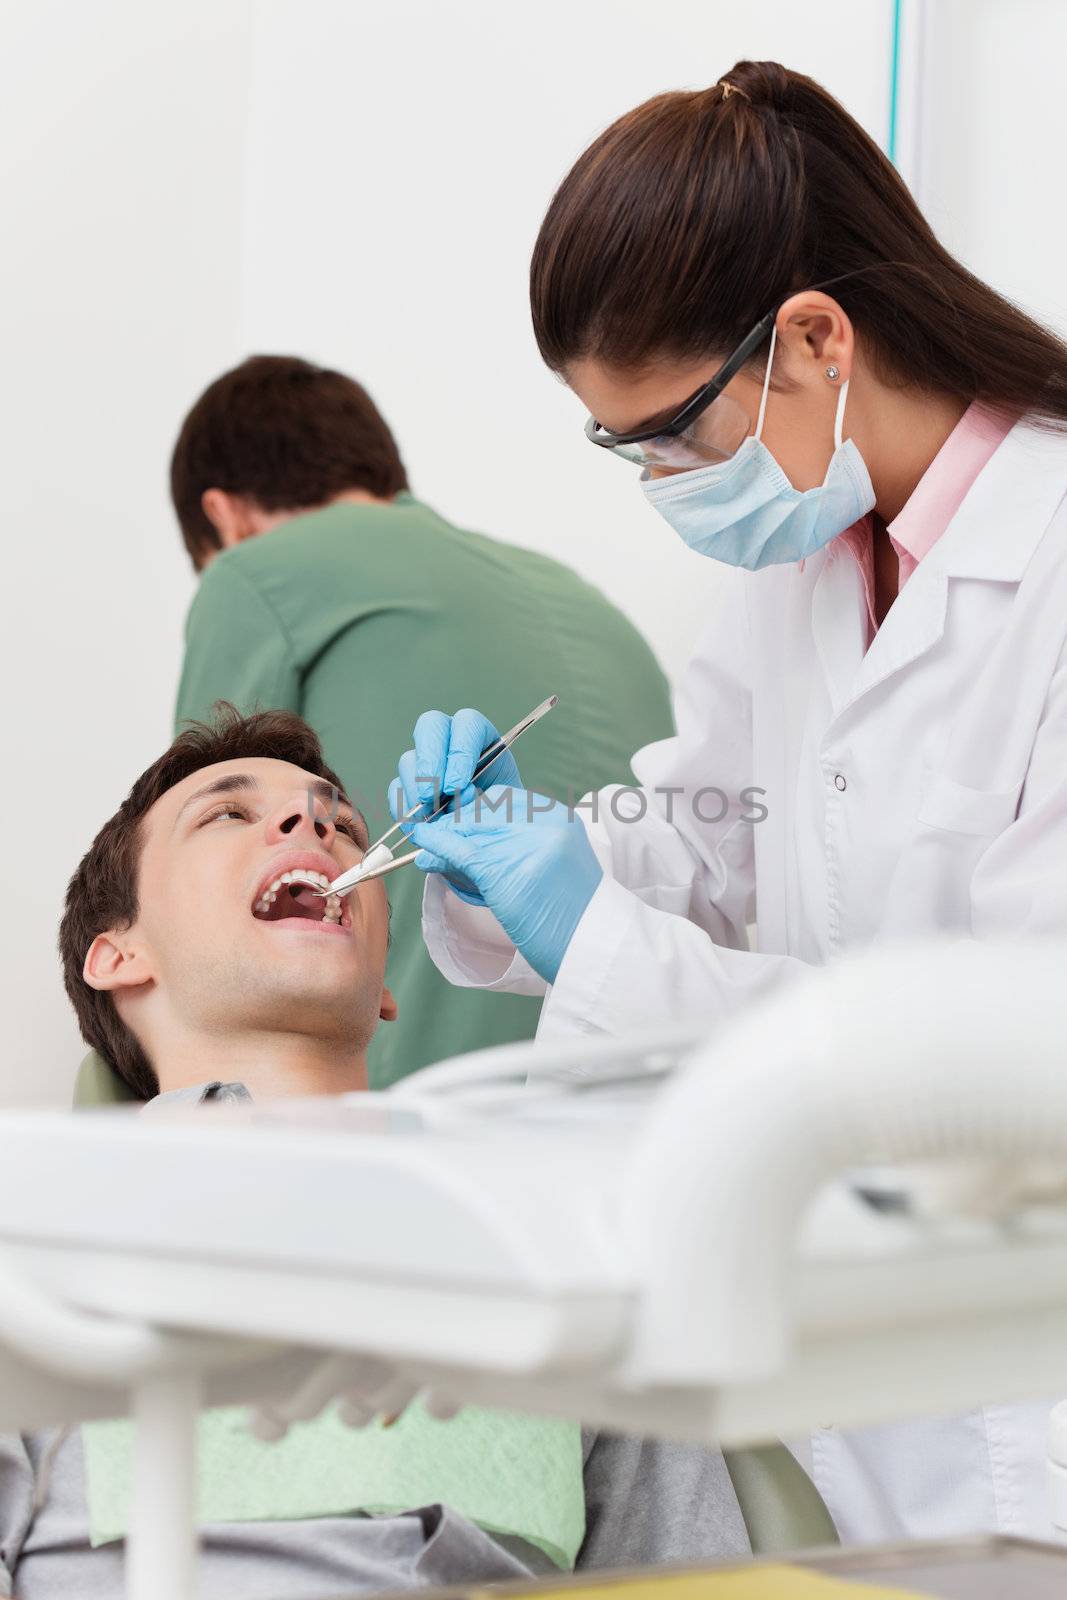 Dentist working on patient's teeth by leaf